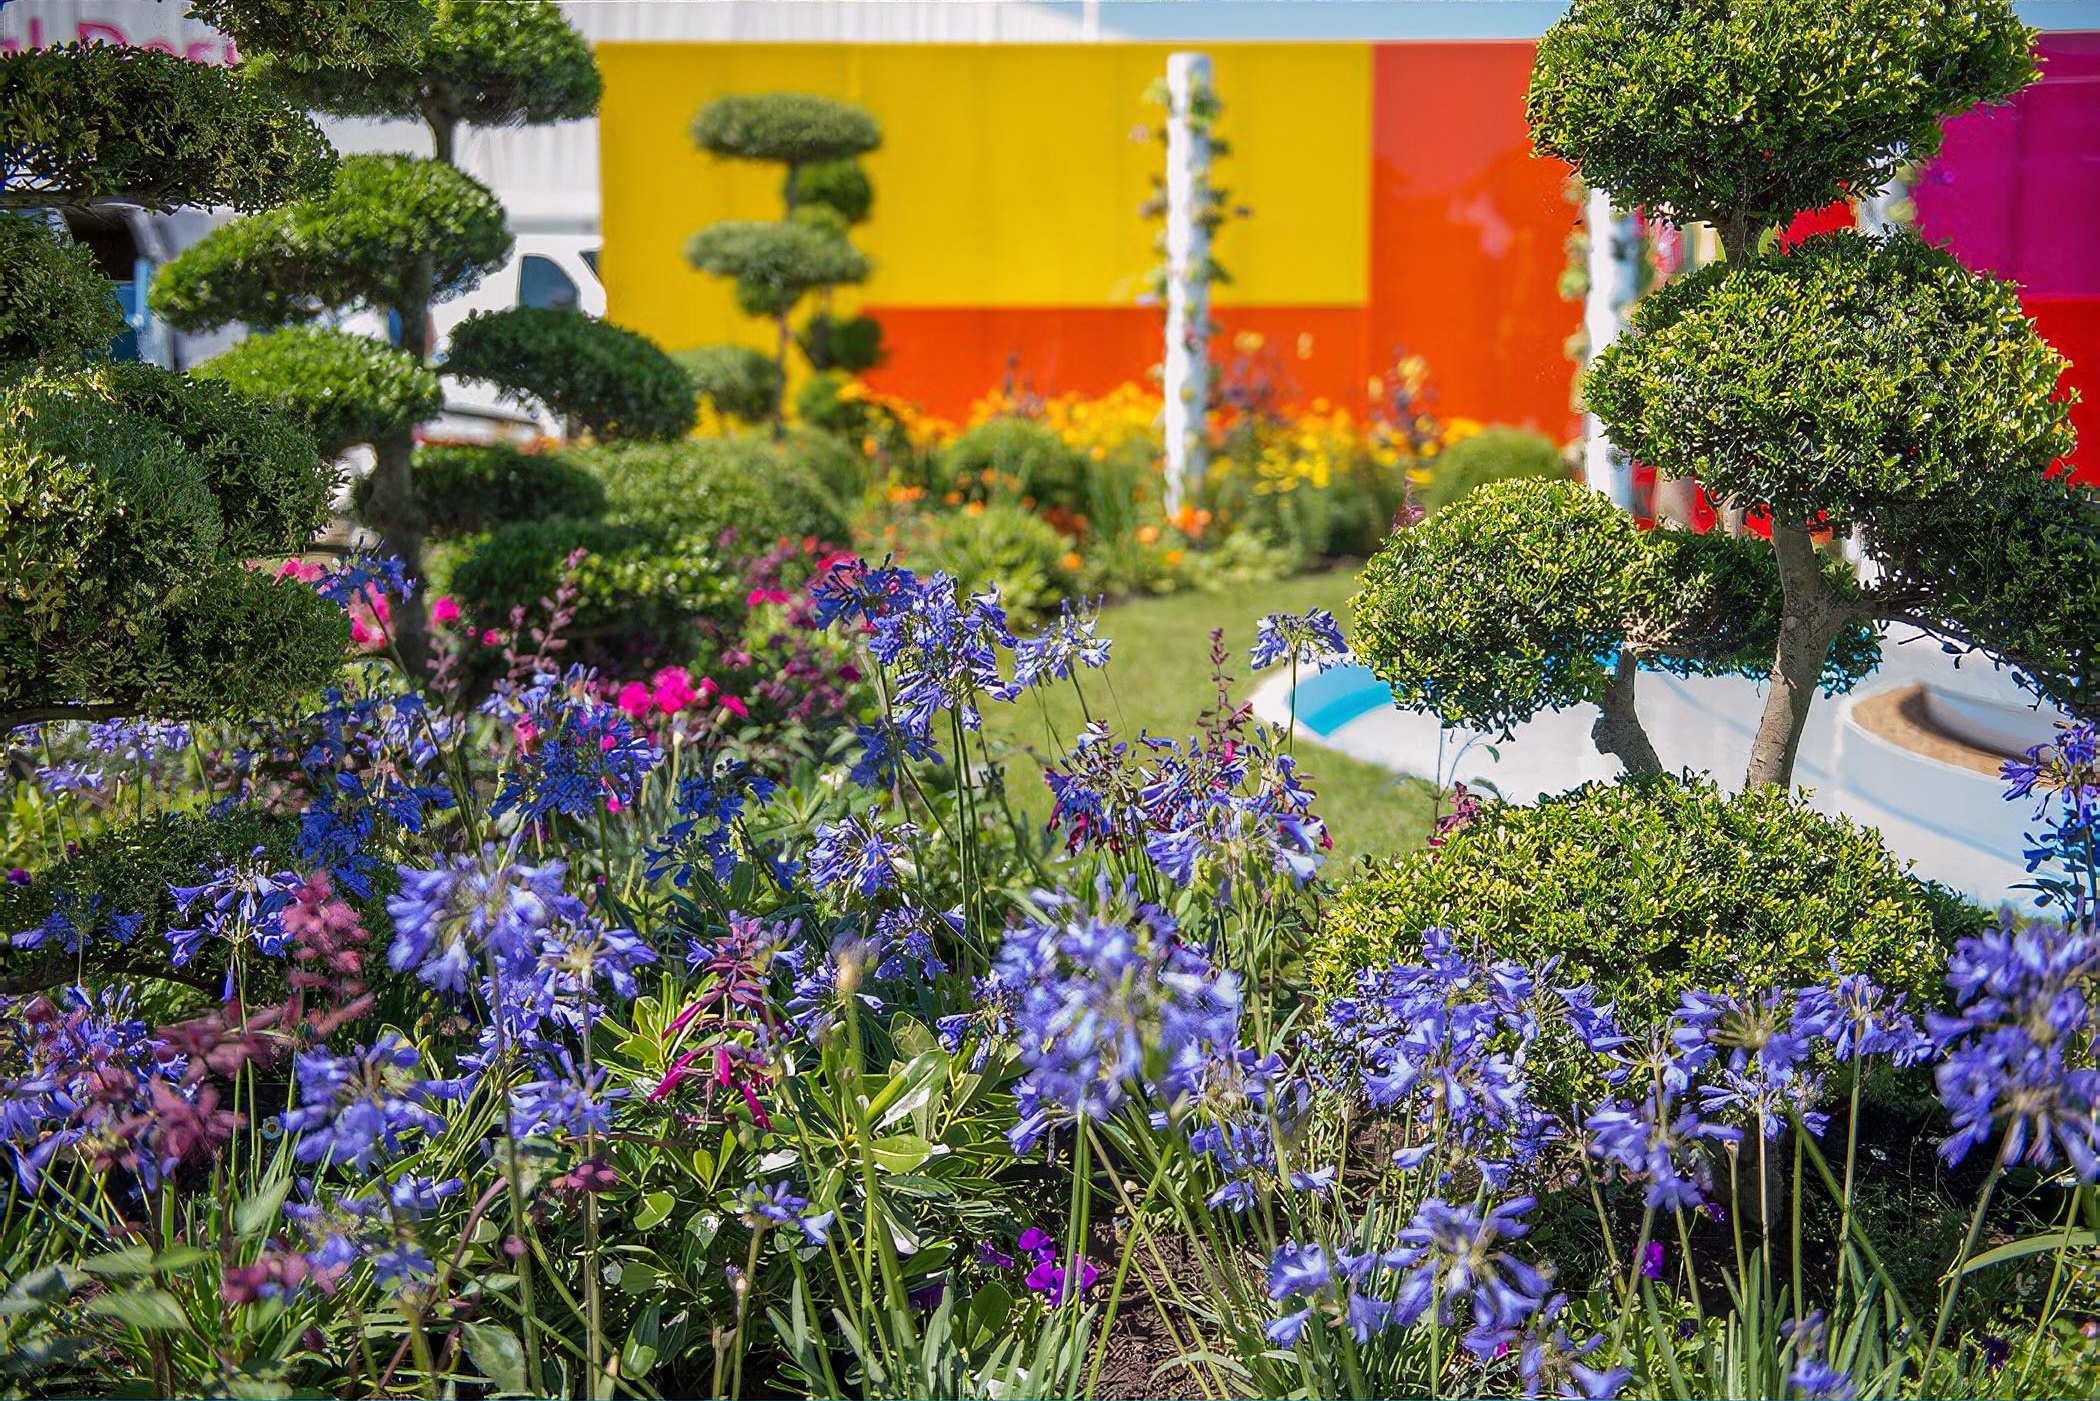 "The Journey of Life” garden marks the birth of a new style of garden design “Poetic Gardens”, as identified by landscape designer and 2015 gold medal winner, Edward Mairis.